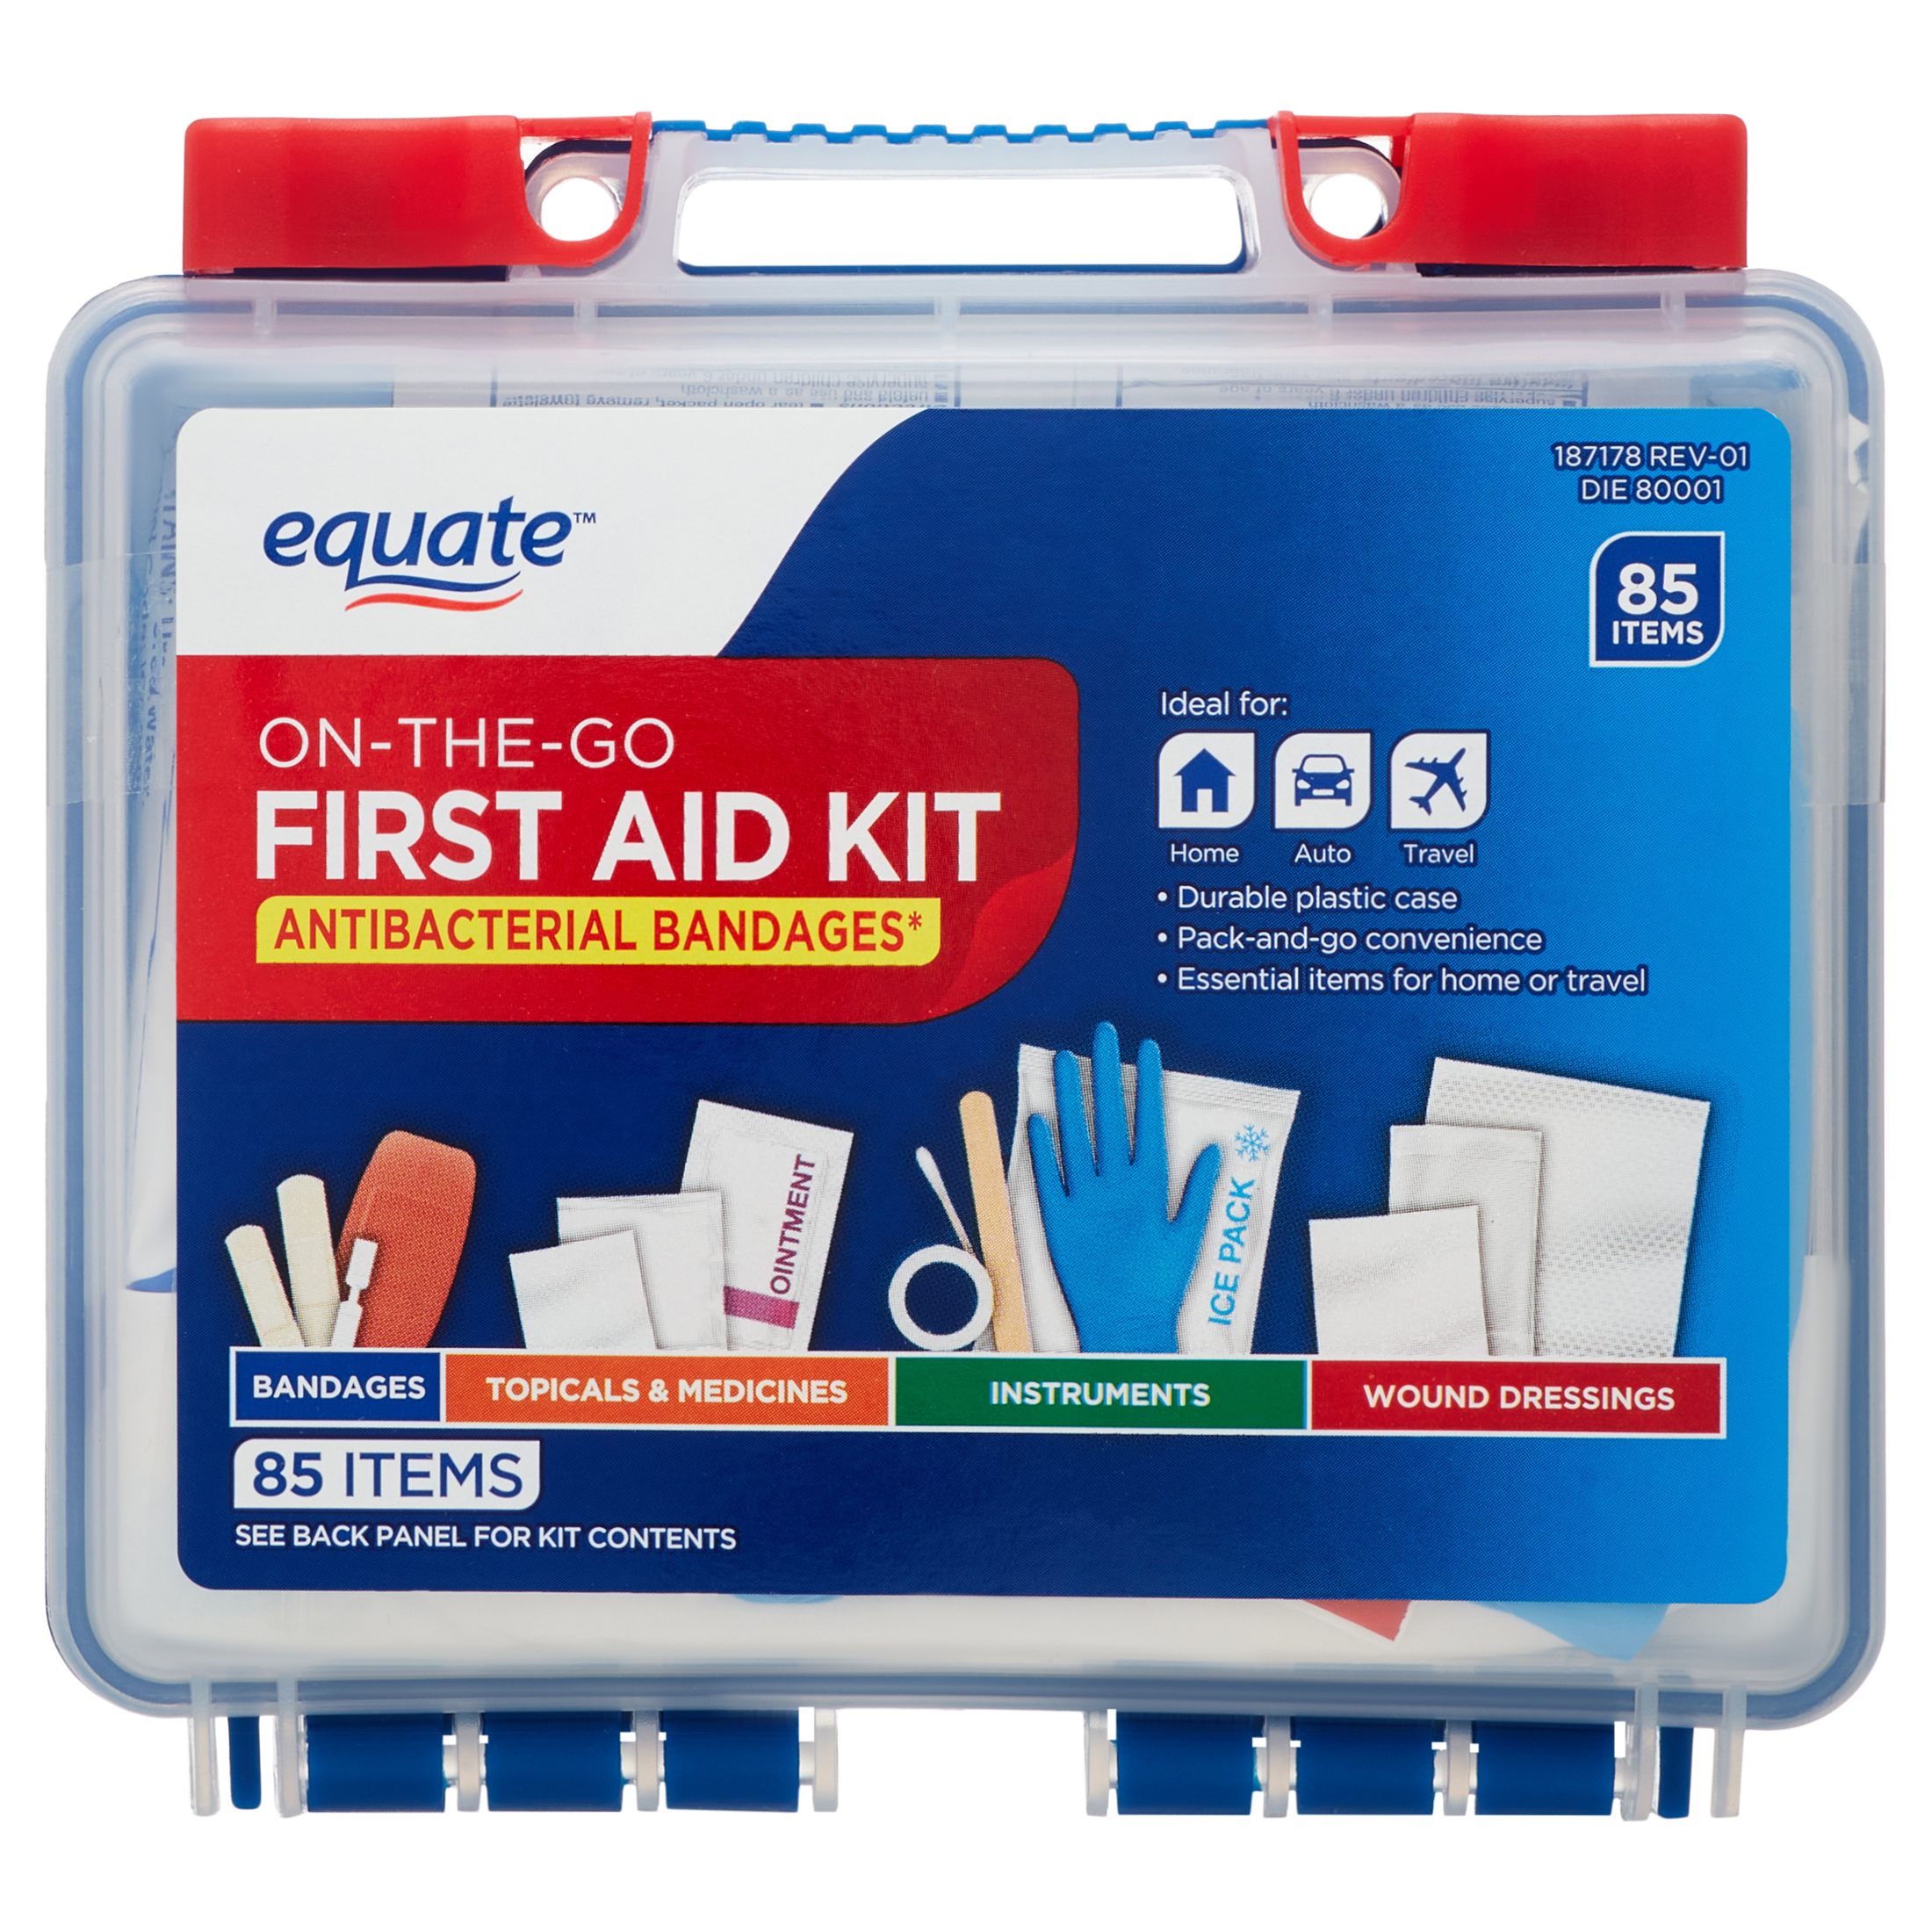 Equate On-The-Go First Aid Kit, 85 Items - image 1 of 9